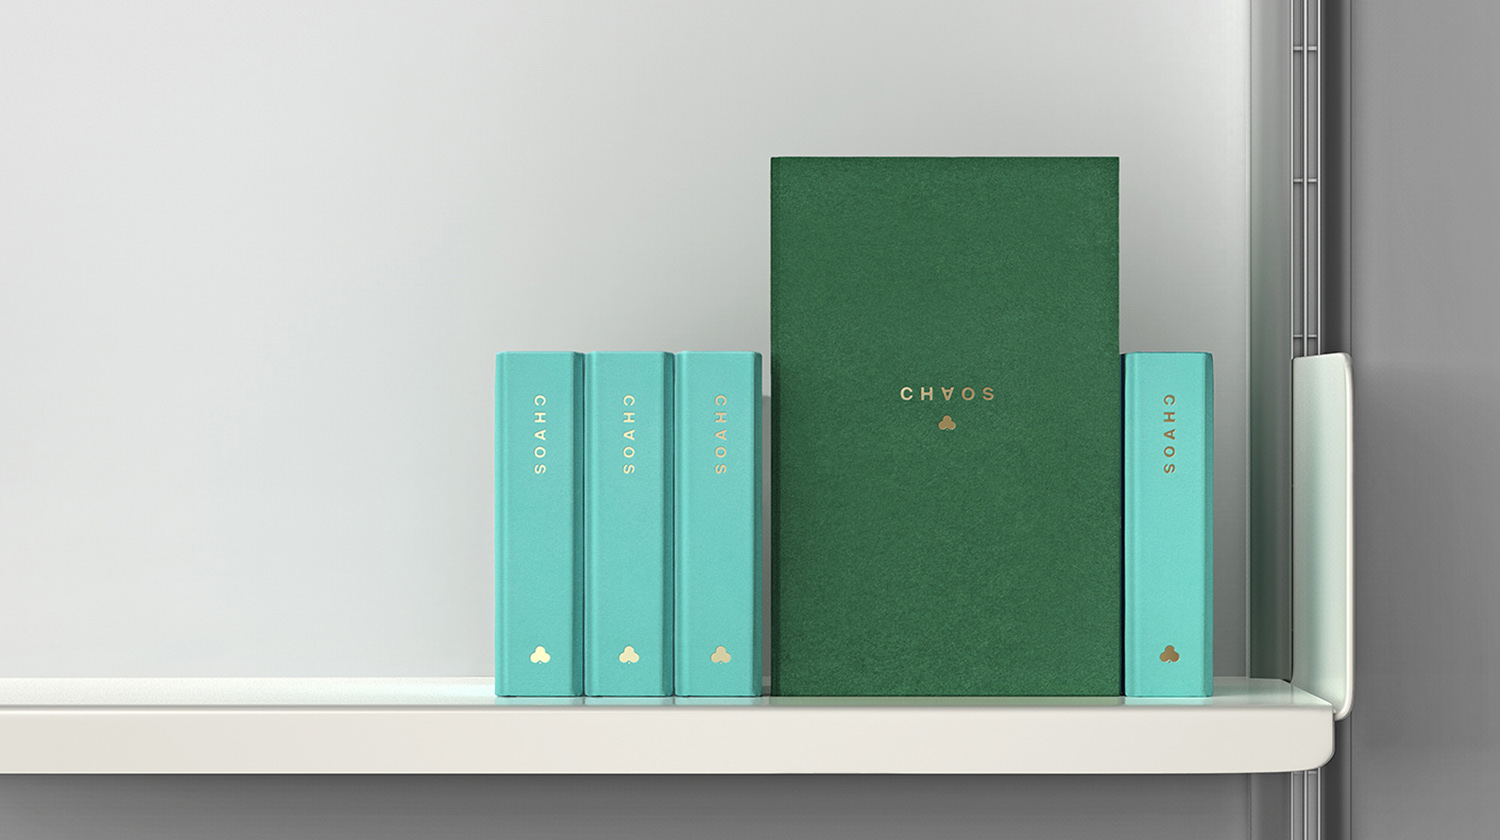 Packaging design featuring Colorplan papers and boards by Socio Design for luxury lifestyle accessory brand Chaos